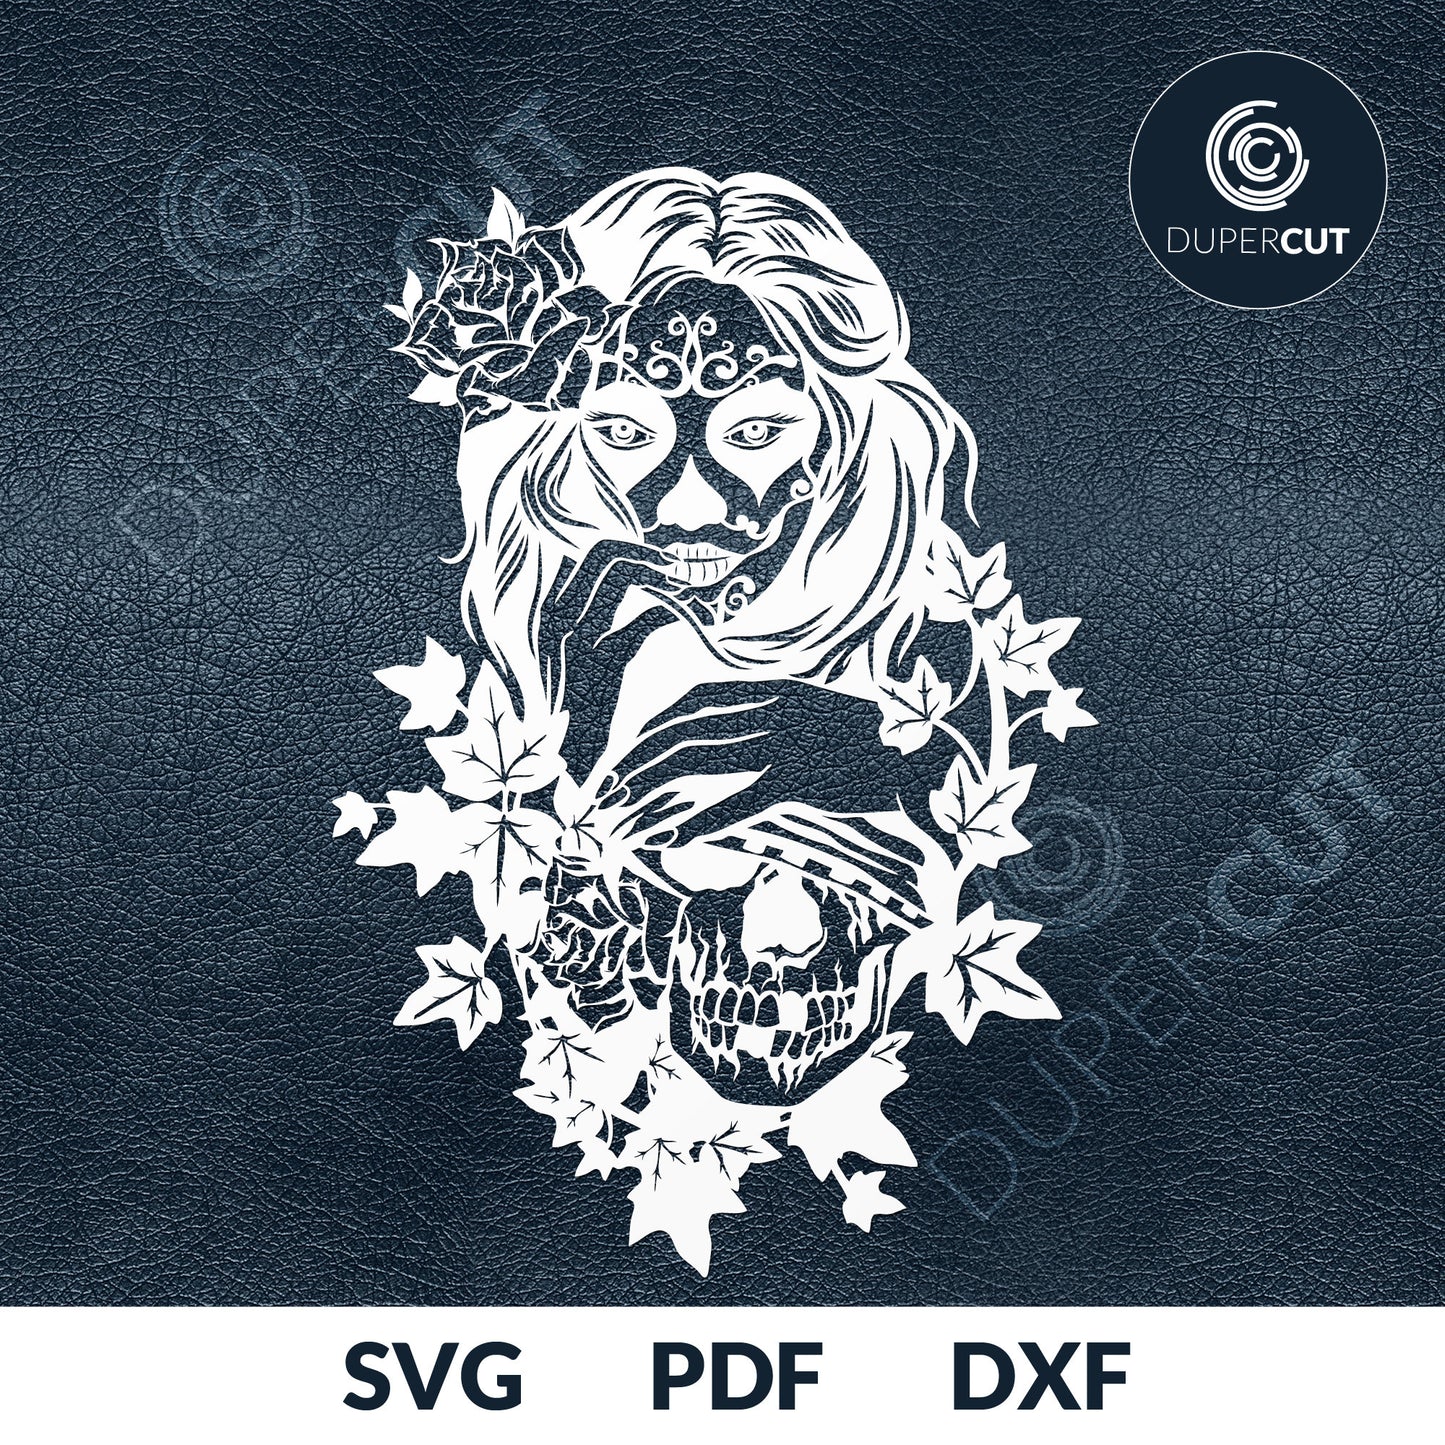 Woman sugar skull, detailed tattoo style illustration, cutting  template - SVG DXF PNG files for Cricut, Glowforge, Silhouette Cameo, CNC Machines